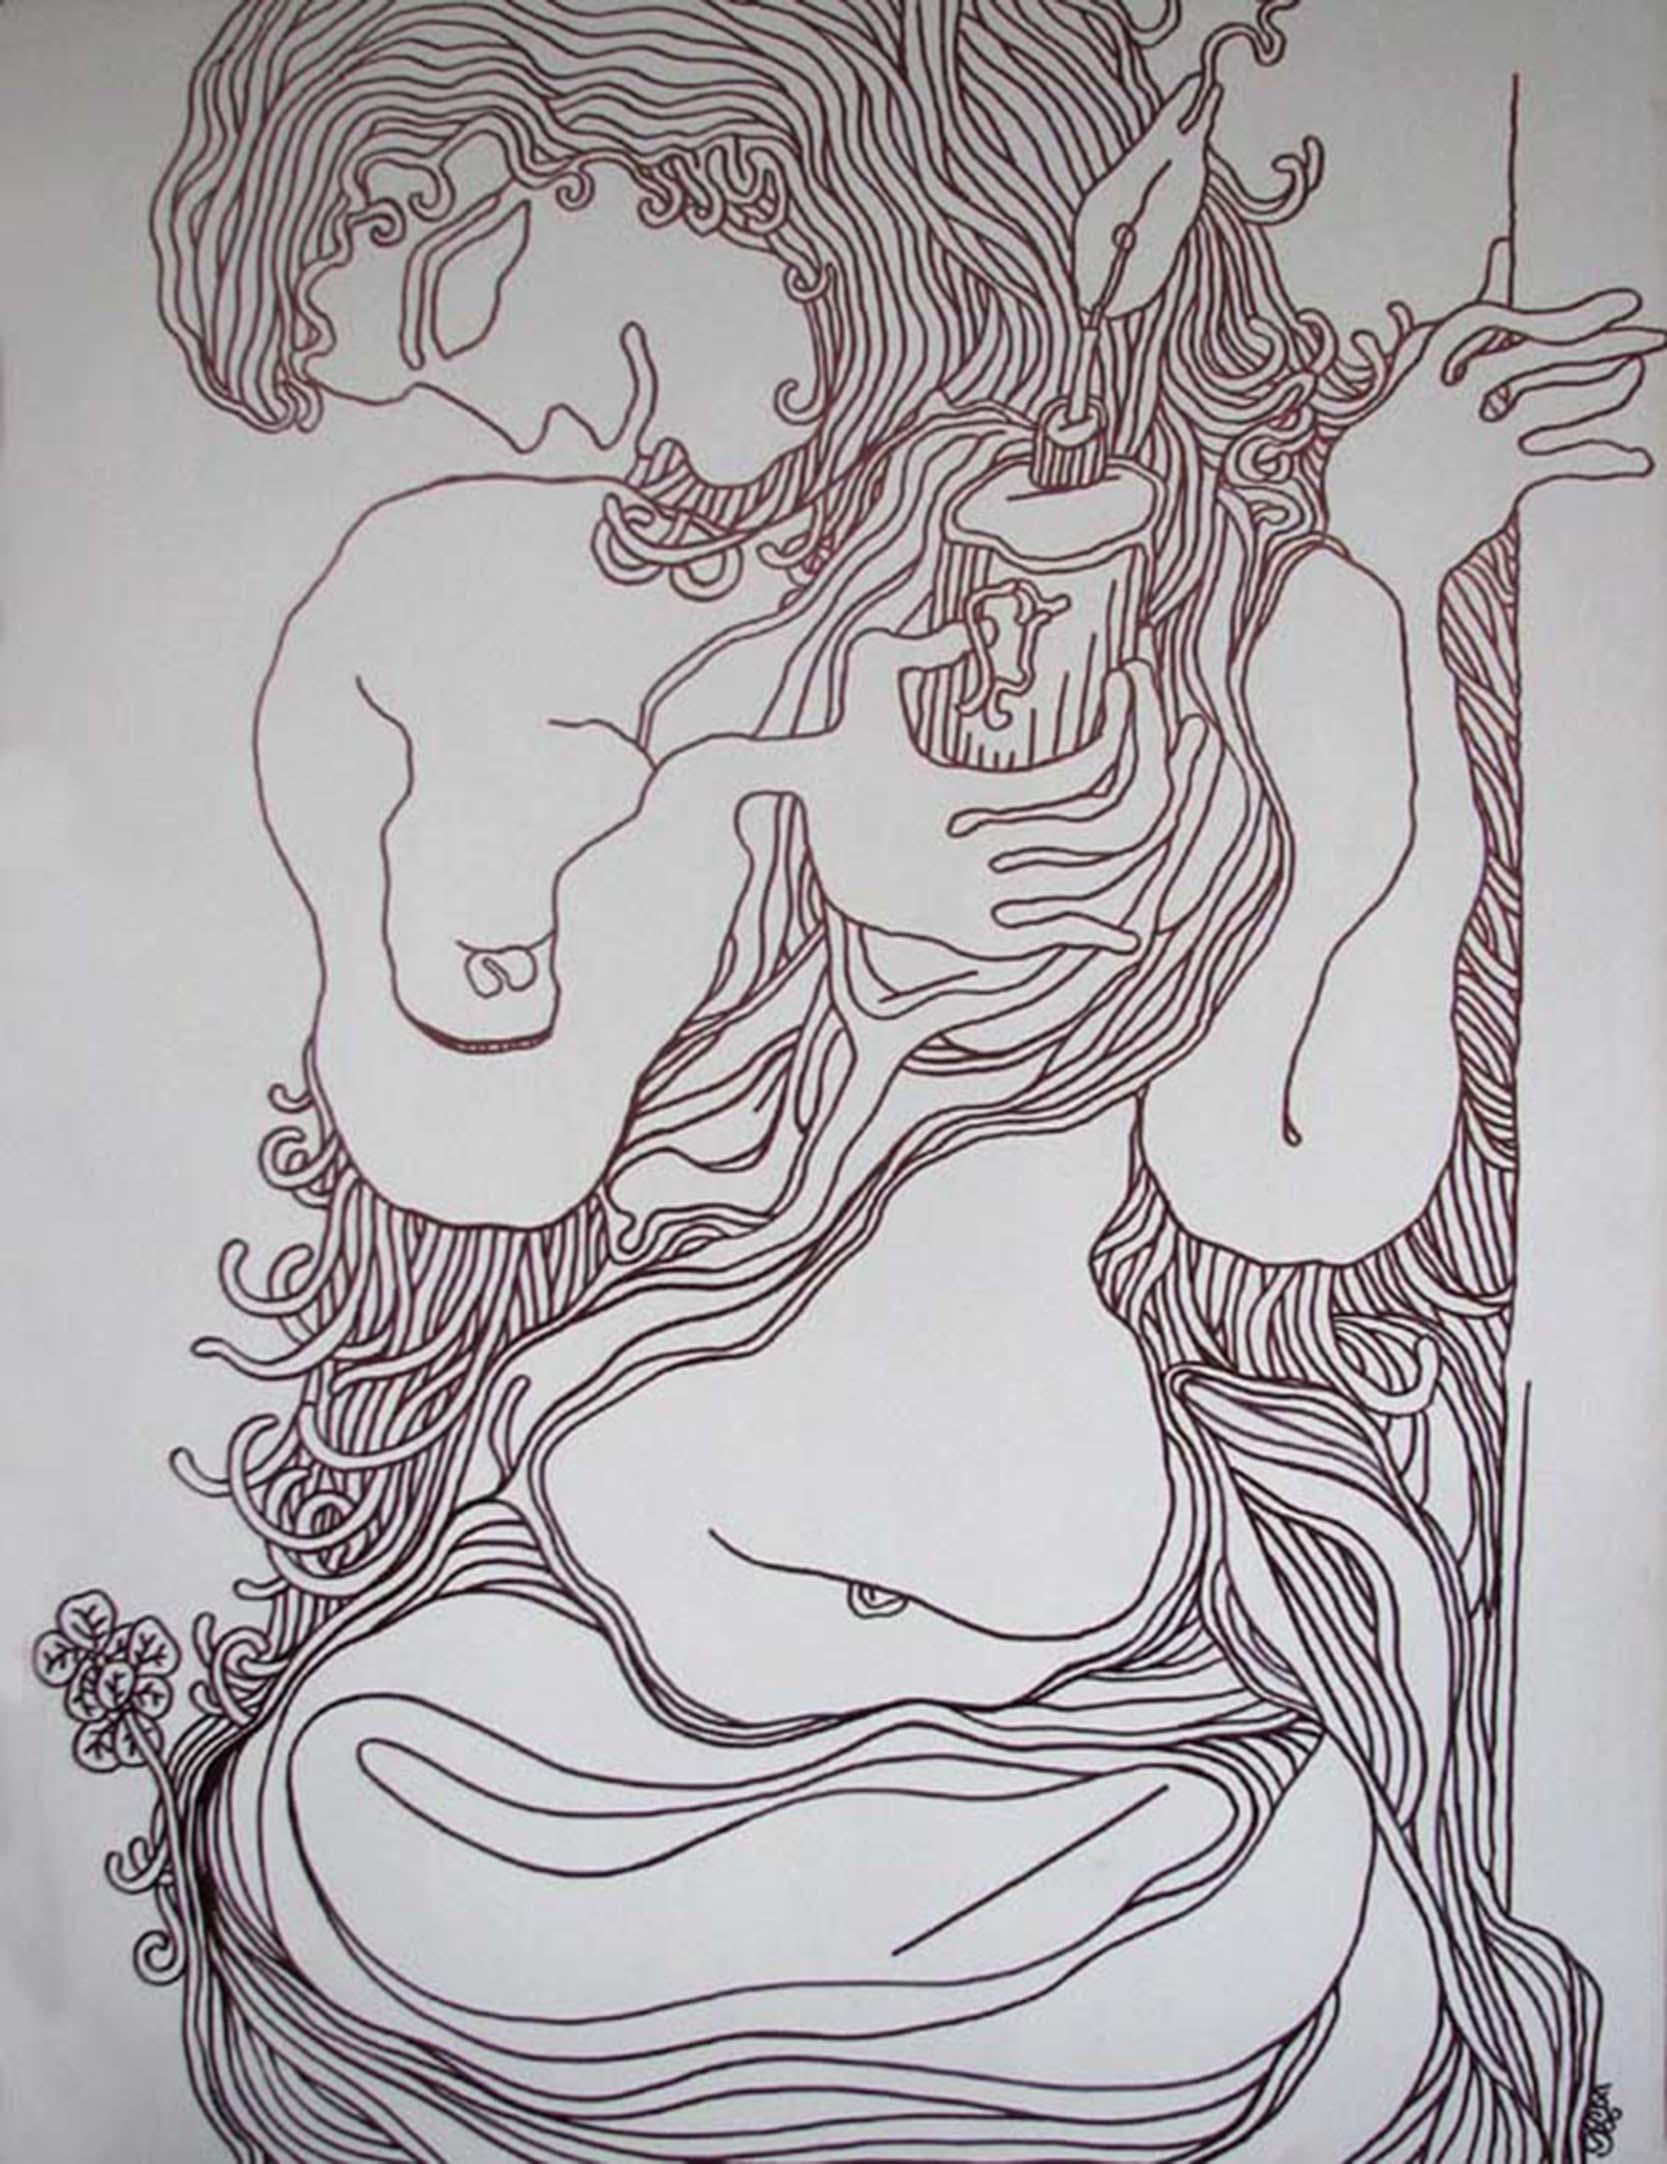 Lady with the Lamp, Nude Drawing, Ink on canvas by Modern IndianArtist"In Stock"